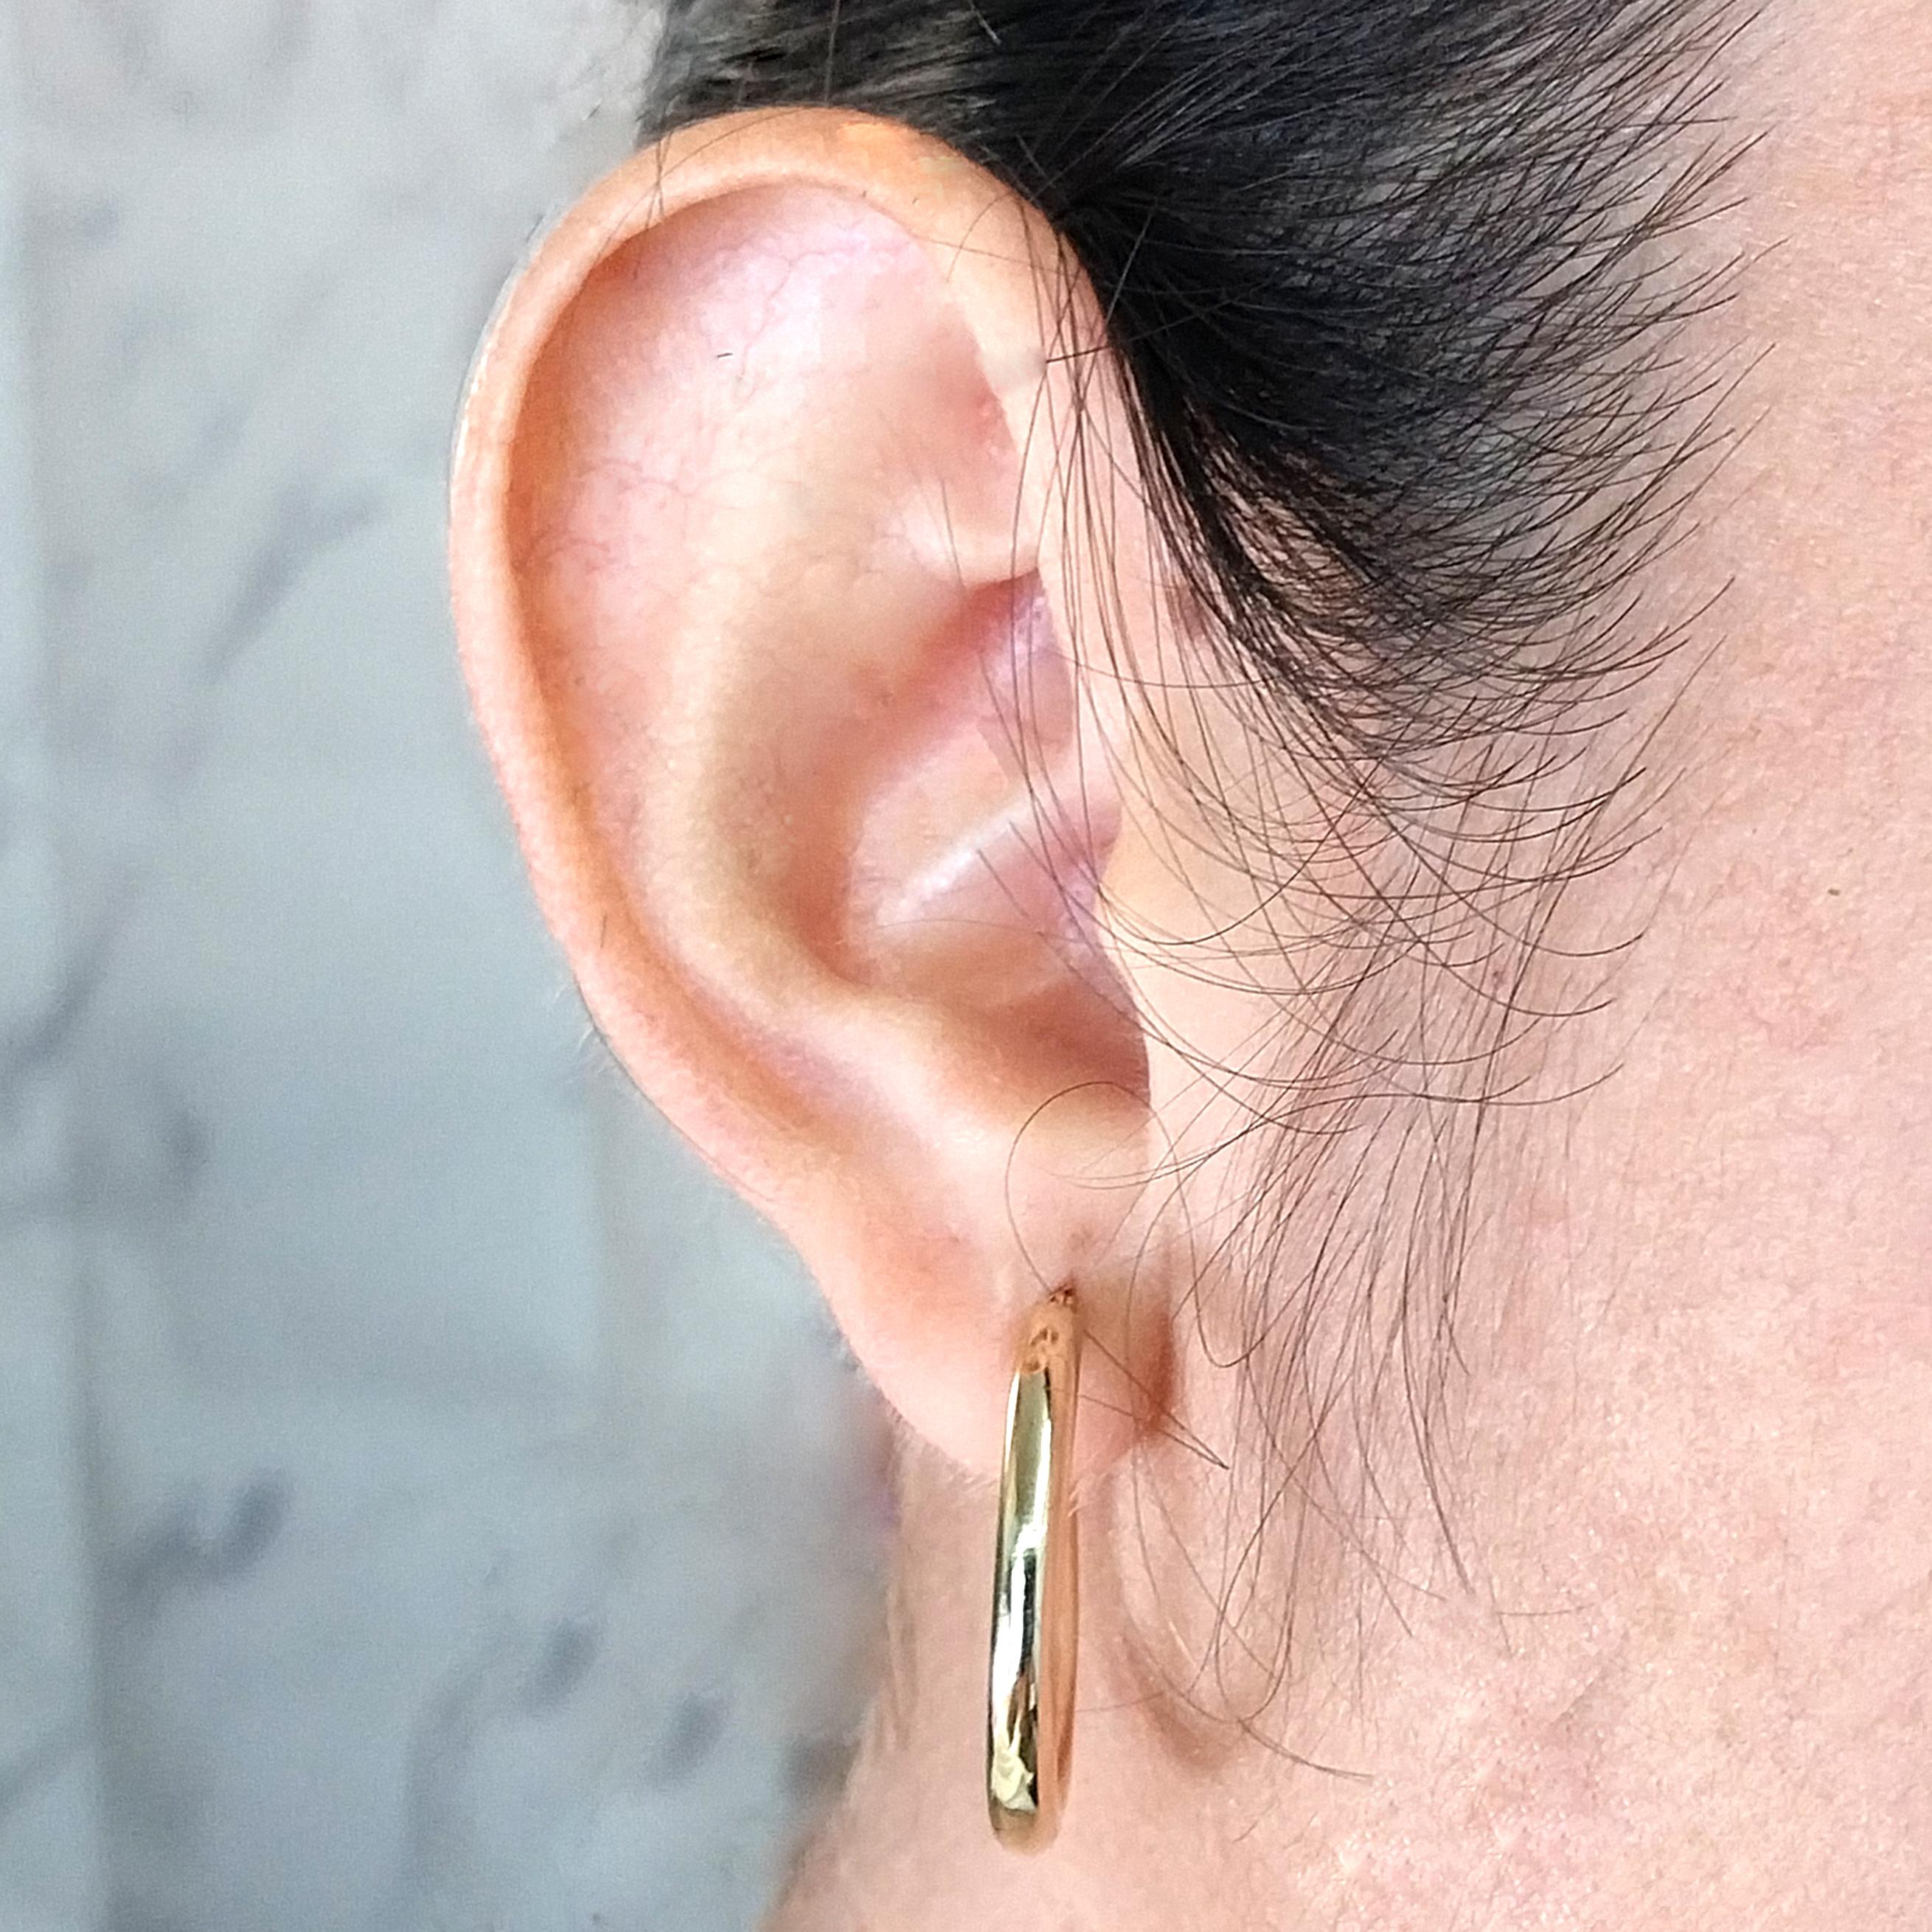 14 Karat Yellow Gold 3mm Round Hoop Earrings. 1 Inch Diameter. Pierced Post with Hinged Clip Back. Finished Weight is 1.7 Grams.